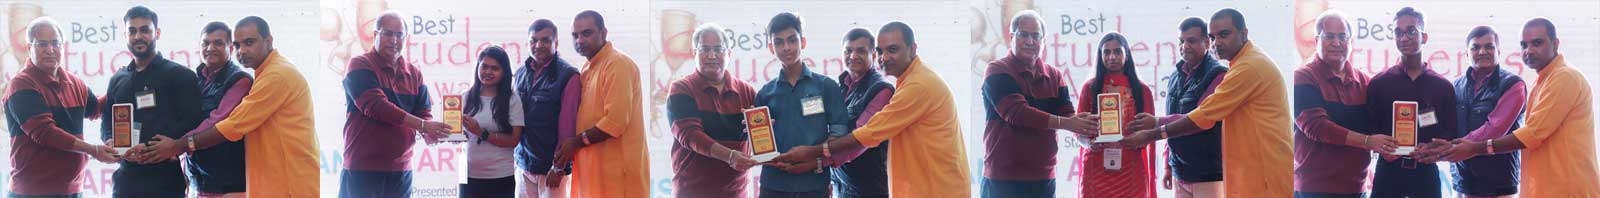 Soni and Ayush Agnihotri Awarded Student of the Year 2018